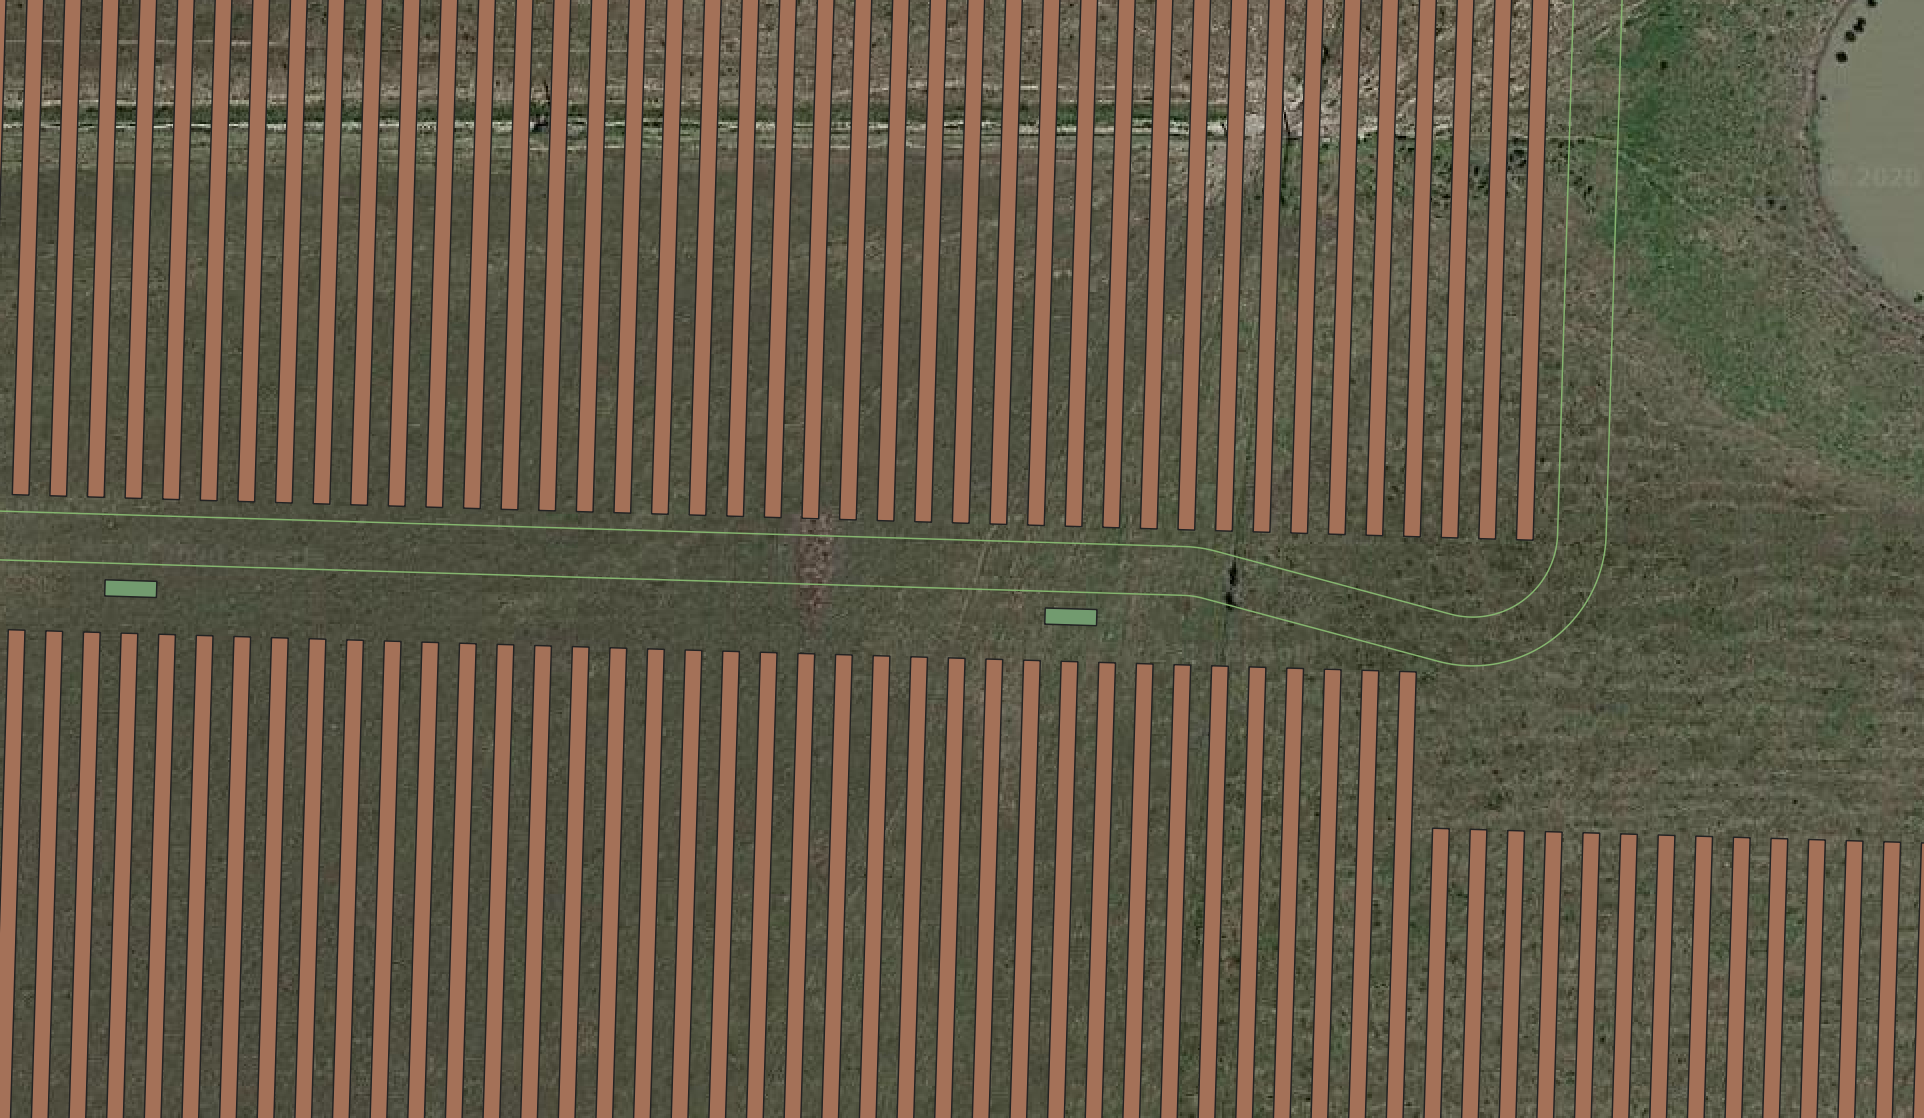 These are KMLs with row outlines, road/fence boundaries, and equipment-pad locations